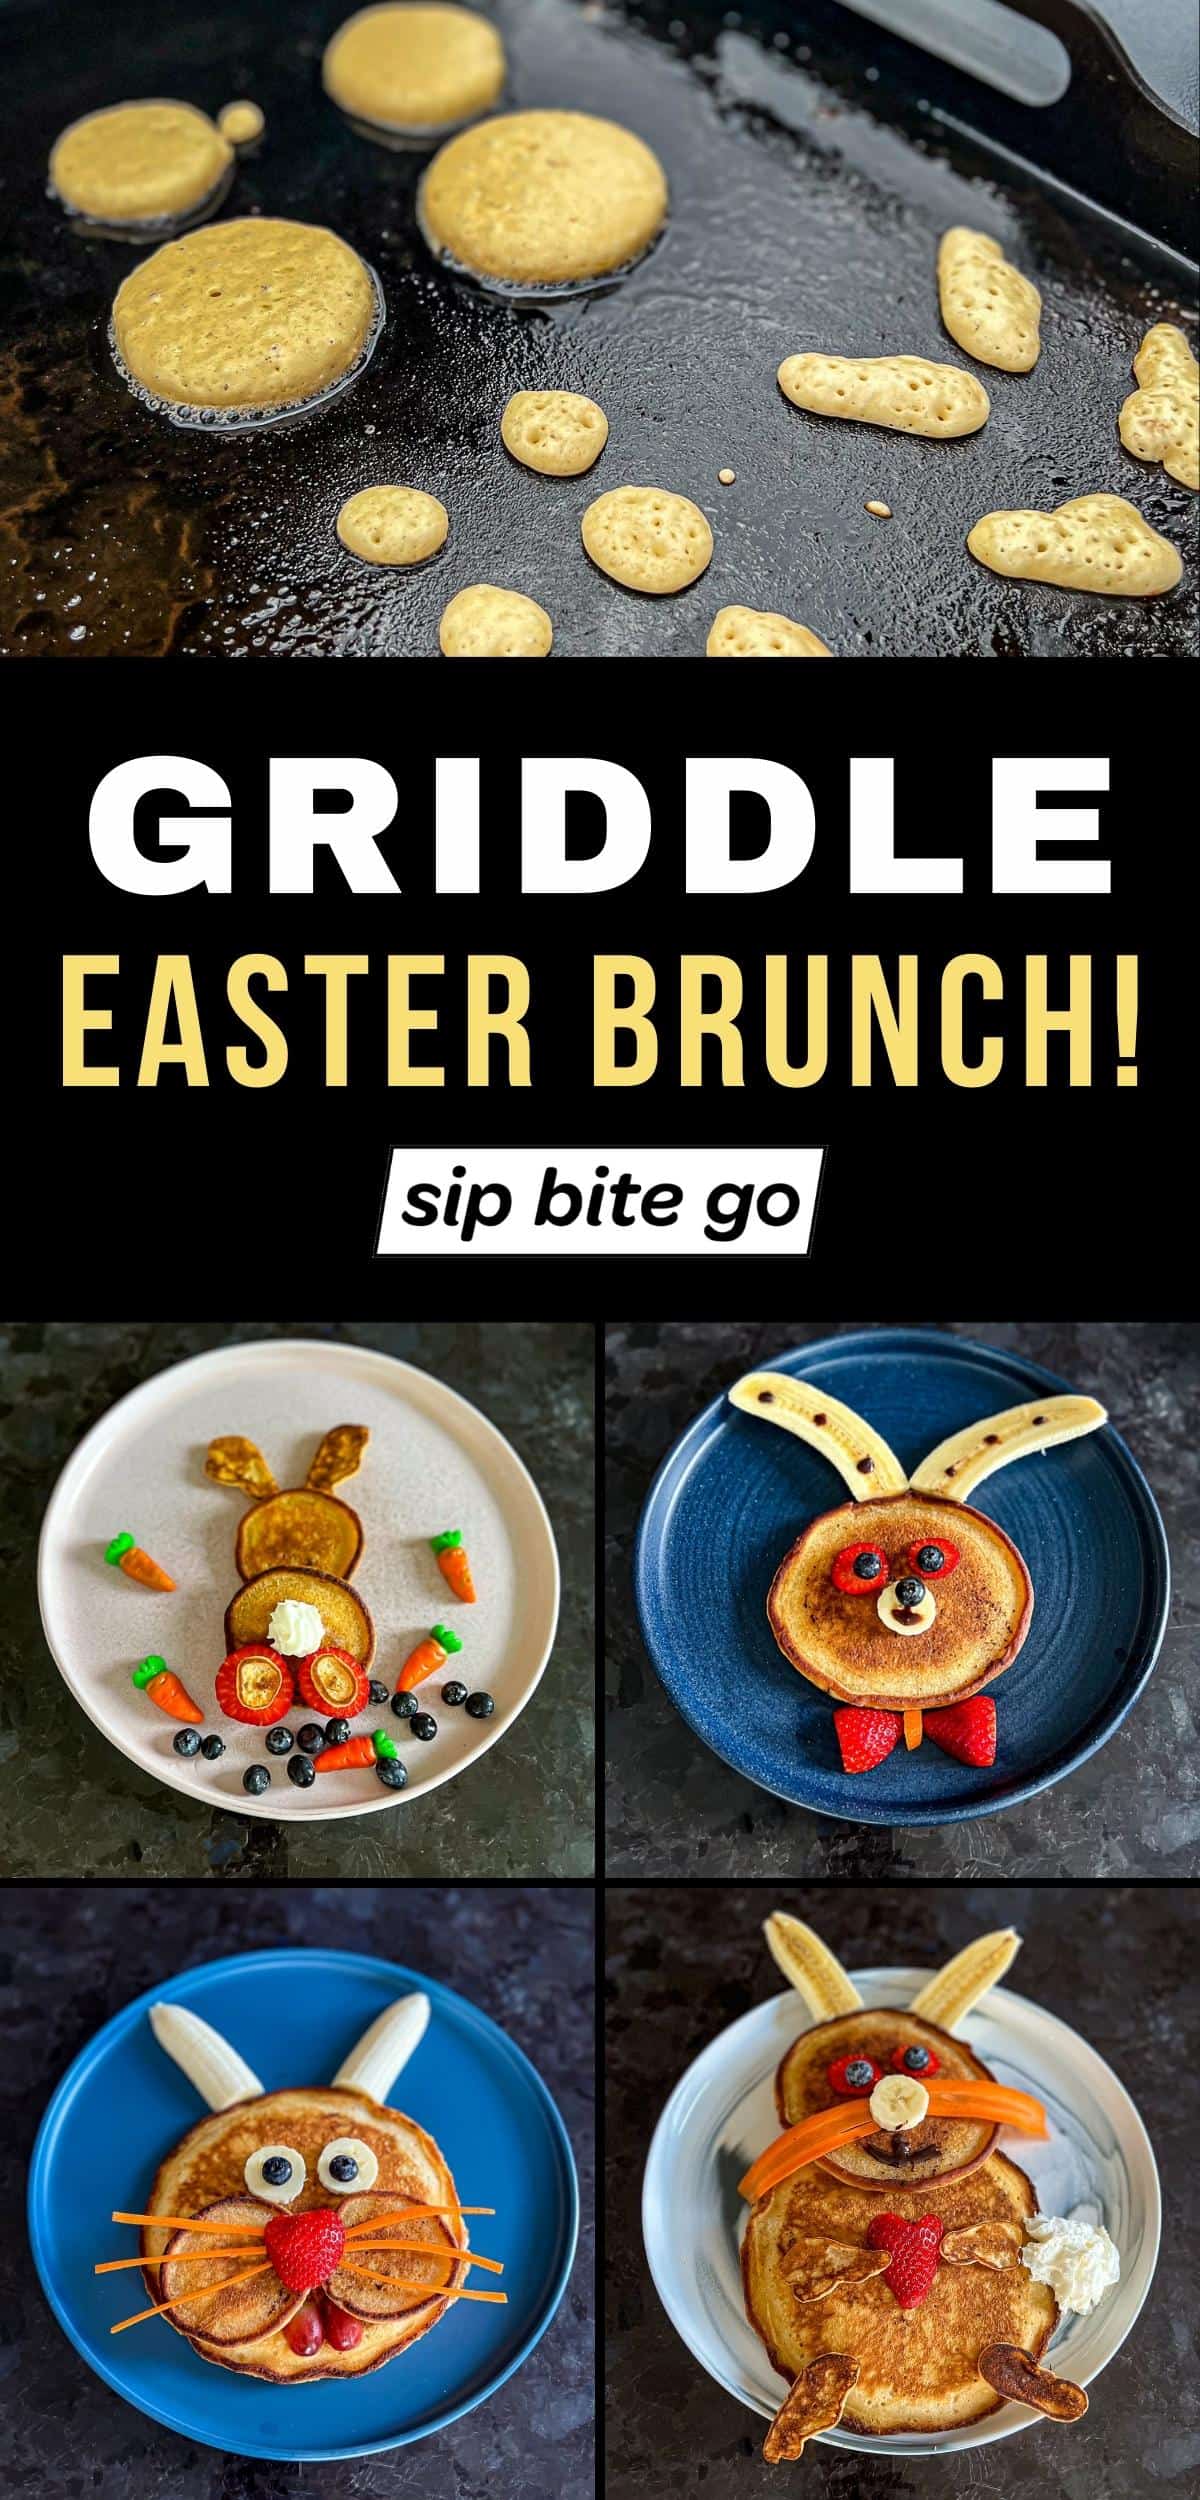 Griddled Easter Brunch Pancakes Recipes with text overlay and Sip Bite Go logo